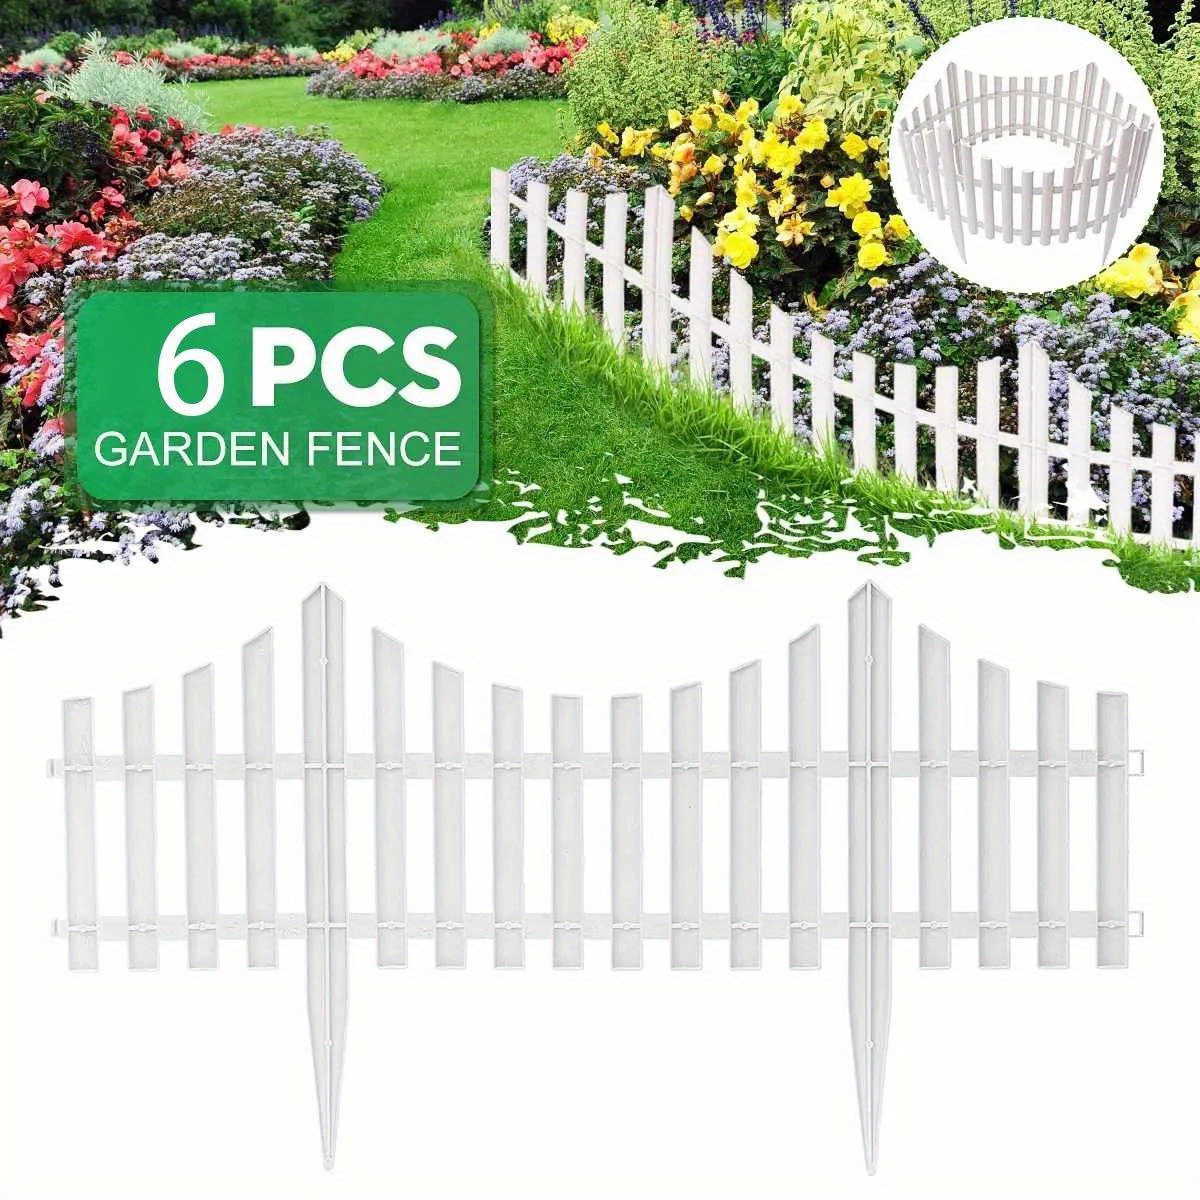 

1pc/4pcs Plastic Garden Fence, Decorative Flower Border Edging, 23.62in X 11.26in, White Picket Style For Outdoor & Indoor Use